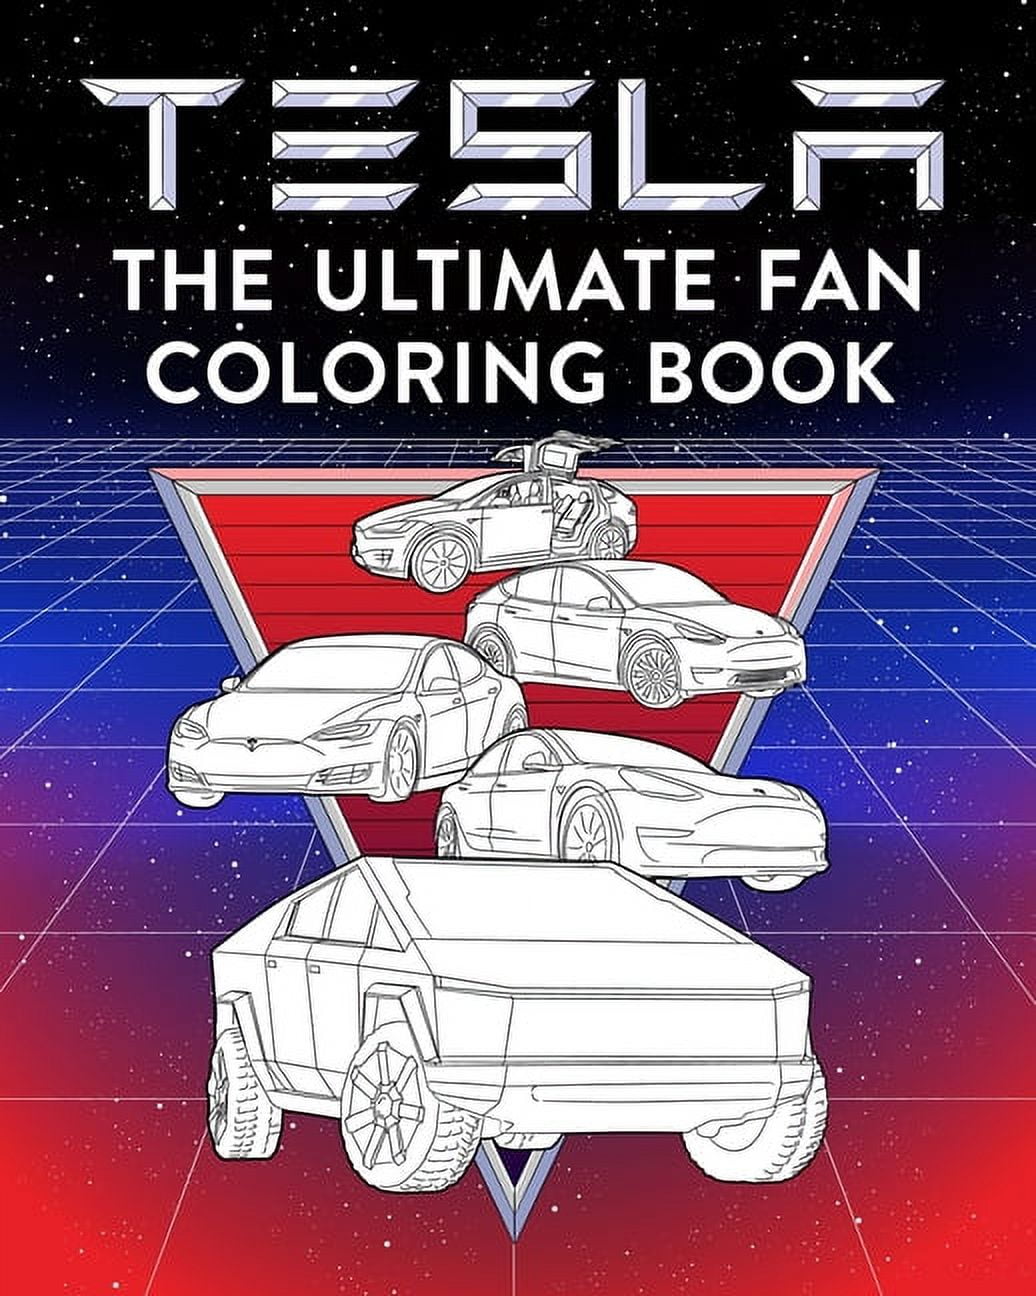 Tesla the ultimate fan coloring book enhance creativity relax and have fun the ultimate tesla vehicle coloring book including roadster st nd gen s x y tesla semi cybertruck gift